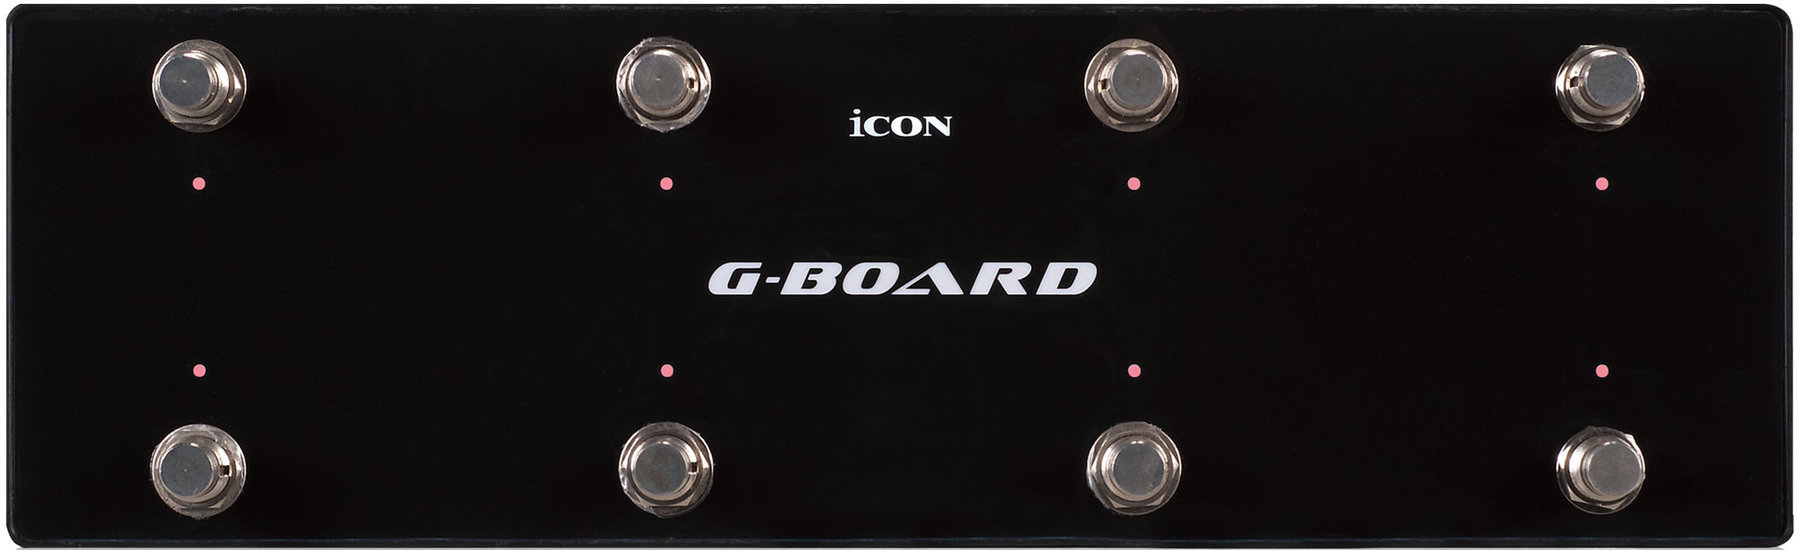 Footswitch iCON G-Board BLK Footswitch